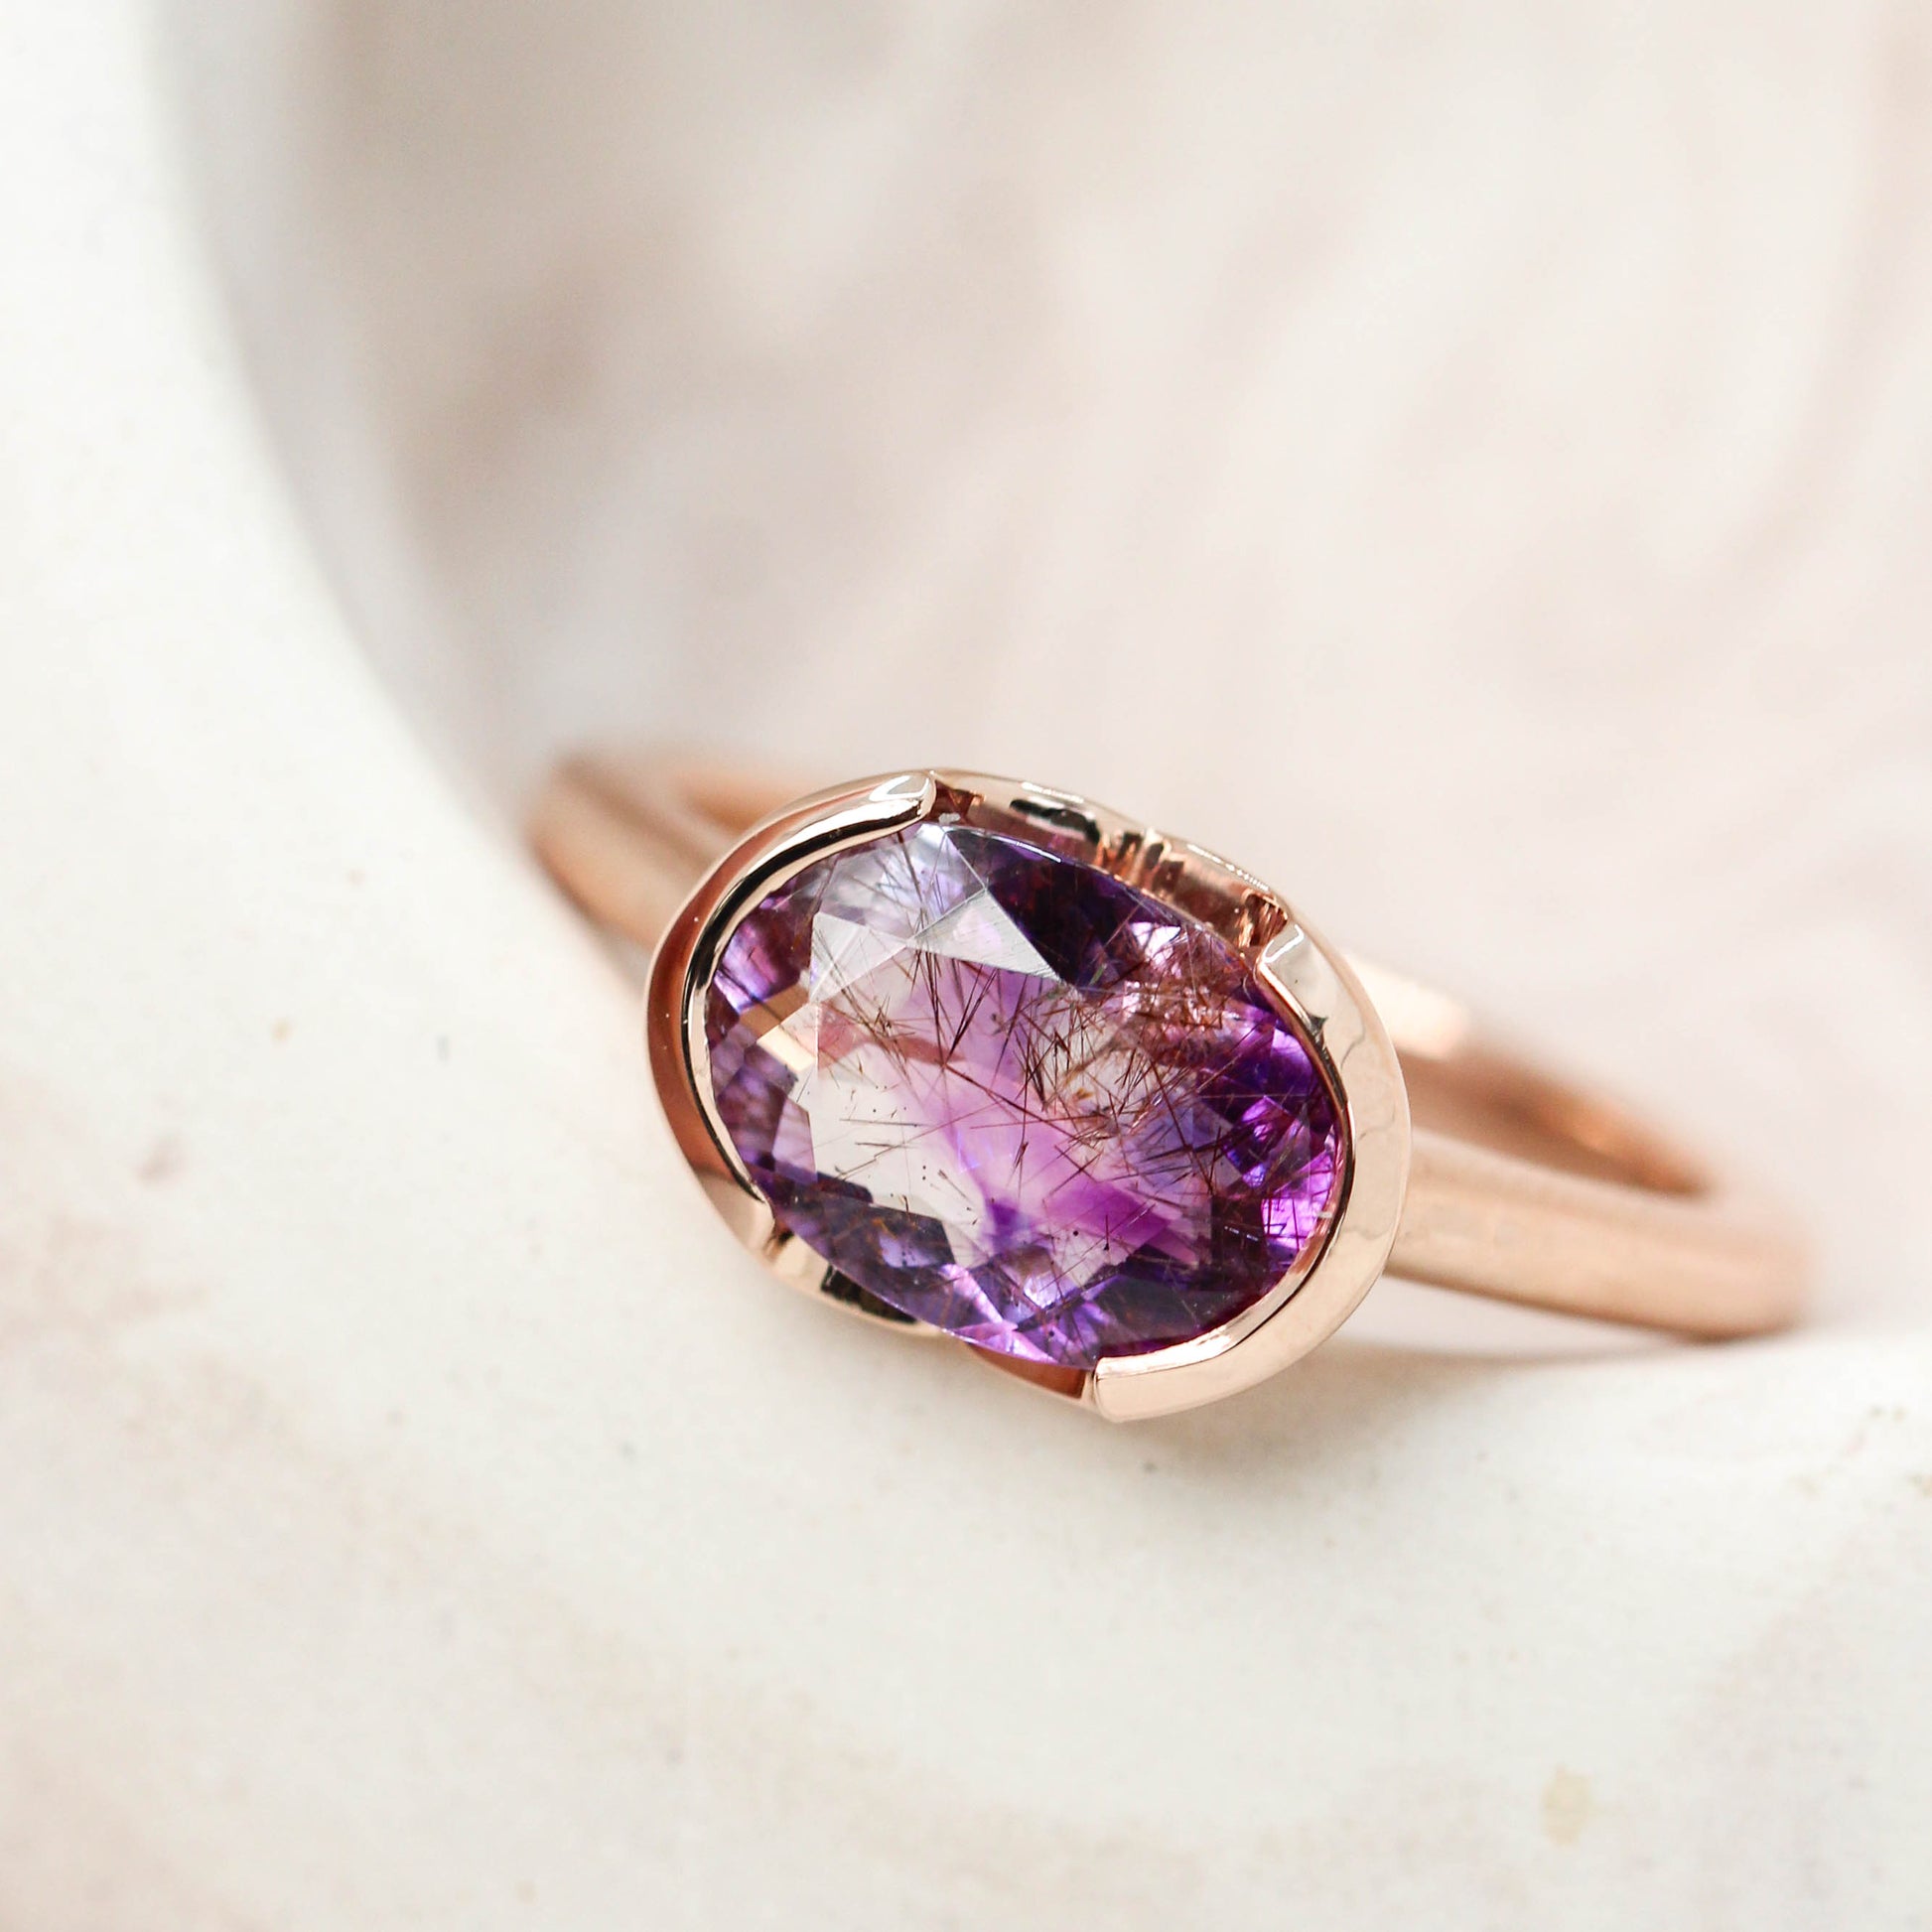 Verbena Ring with a 1.80 Carat Purple Melody Quartz in 14k Rose Gold - Ready to Size and Ship - Midwinter Co. Alternative Bridal Rings and Modern Fine Jewelry